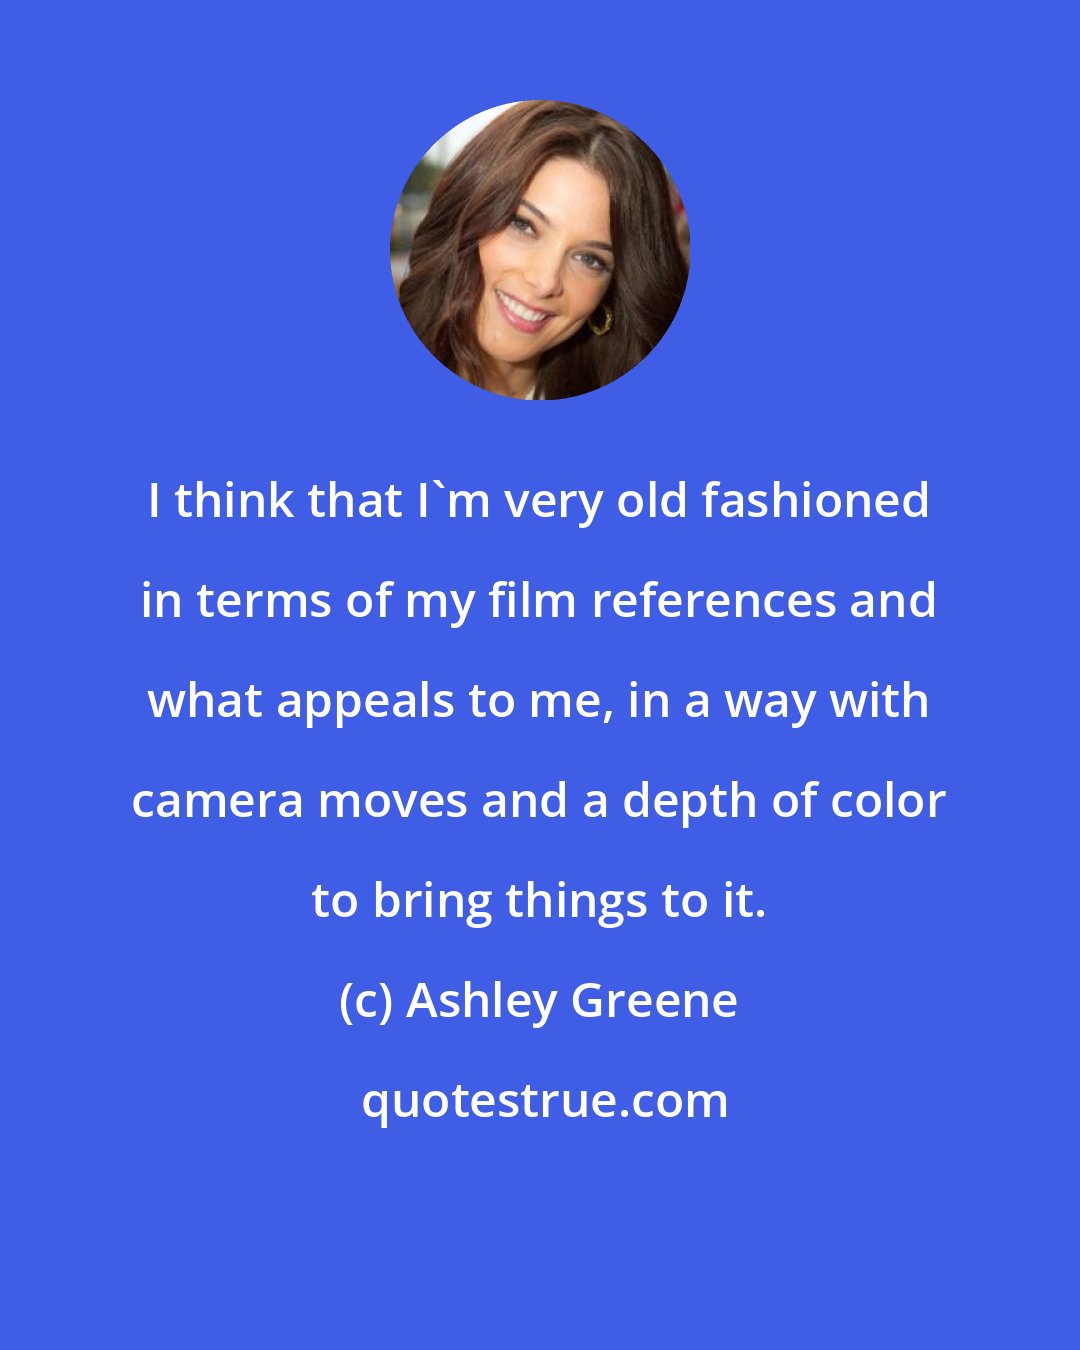 Ashley Greene: I think that I'm very old fashioned in terms of my film references and what appeals to me, in a way with camera moves and a depth of color to bring things to it.